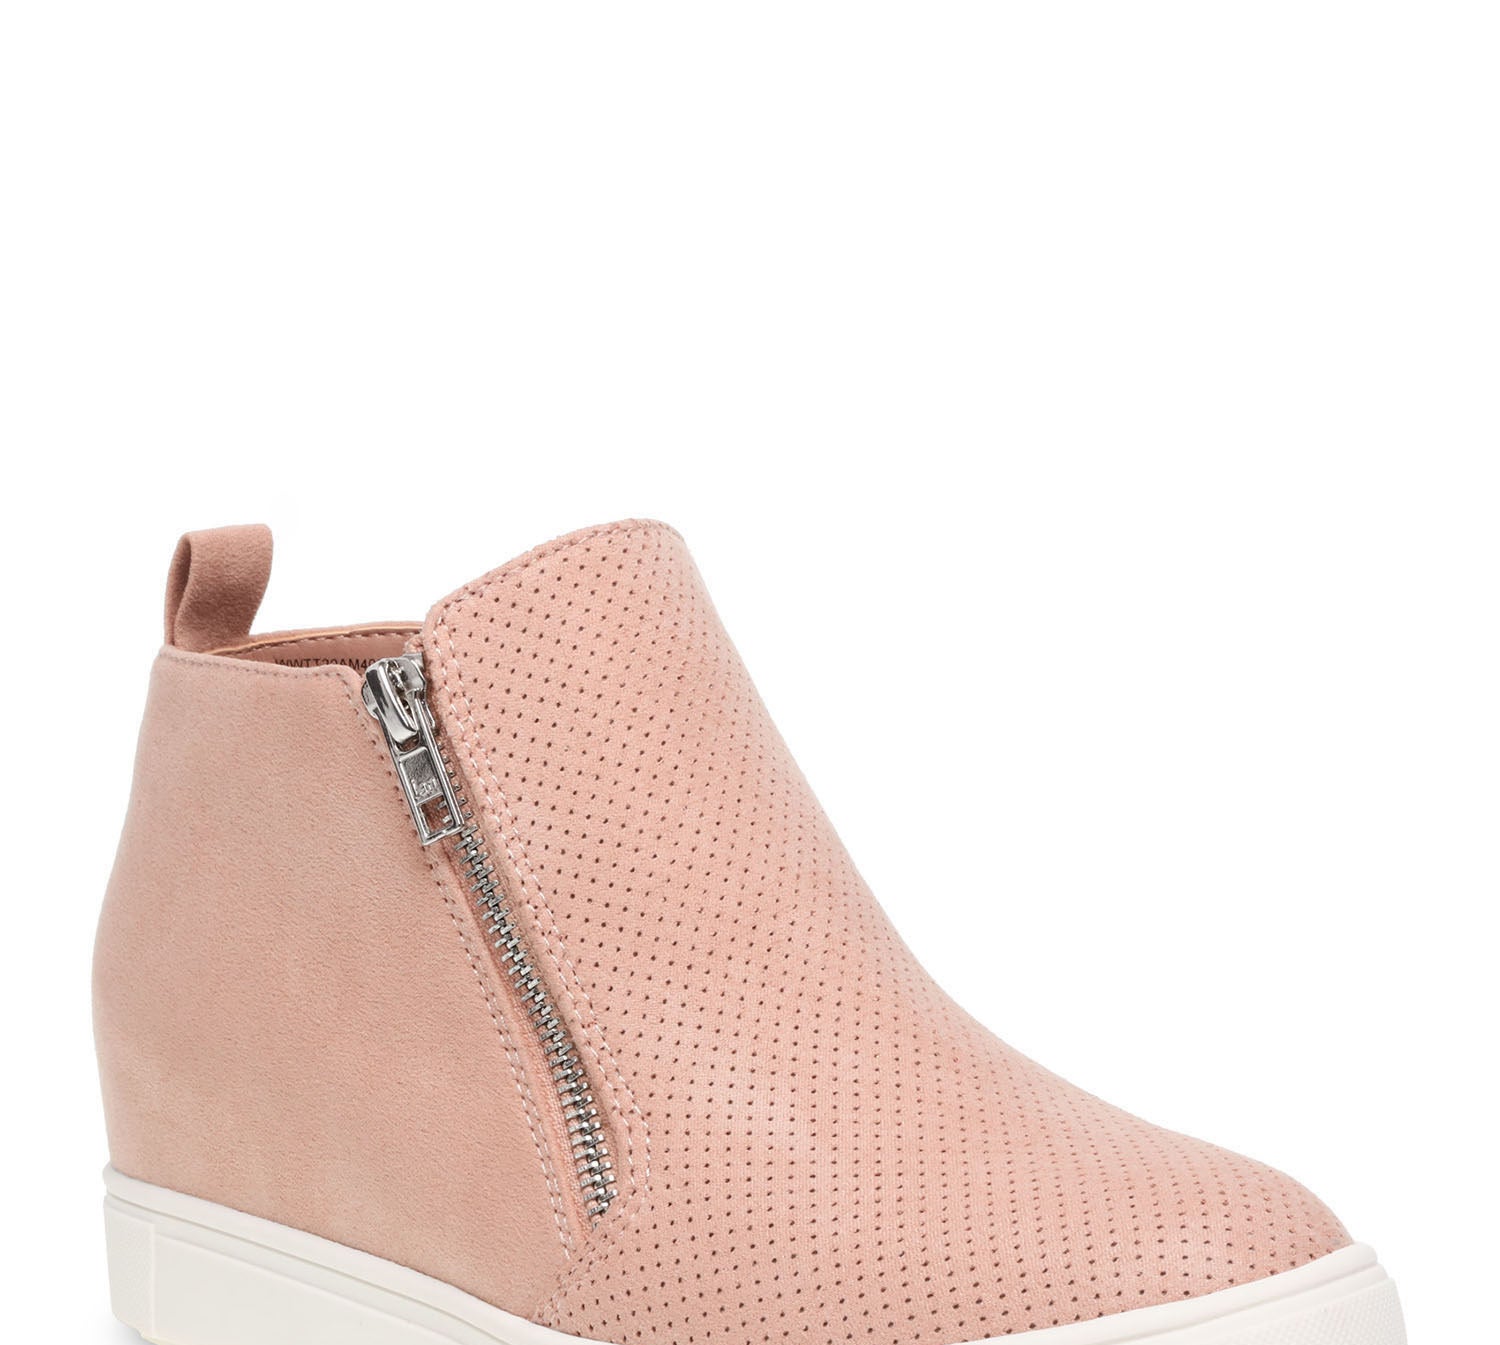 The pink sneaker wedges